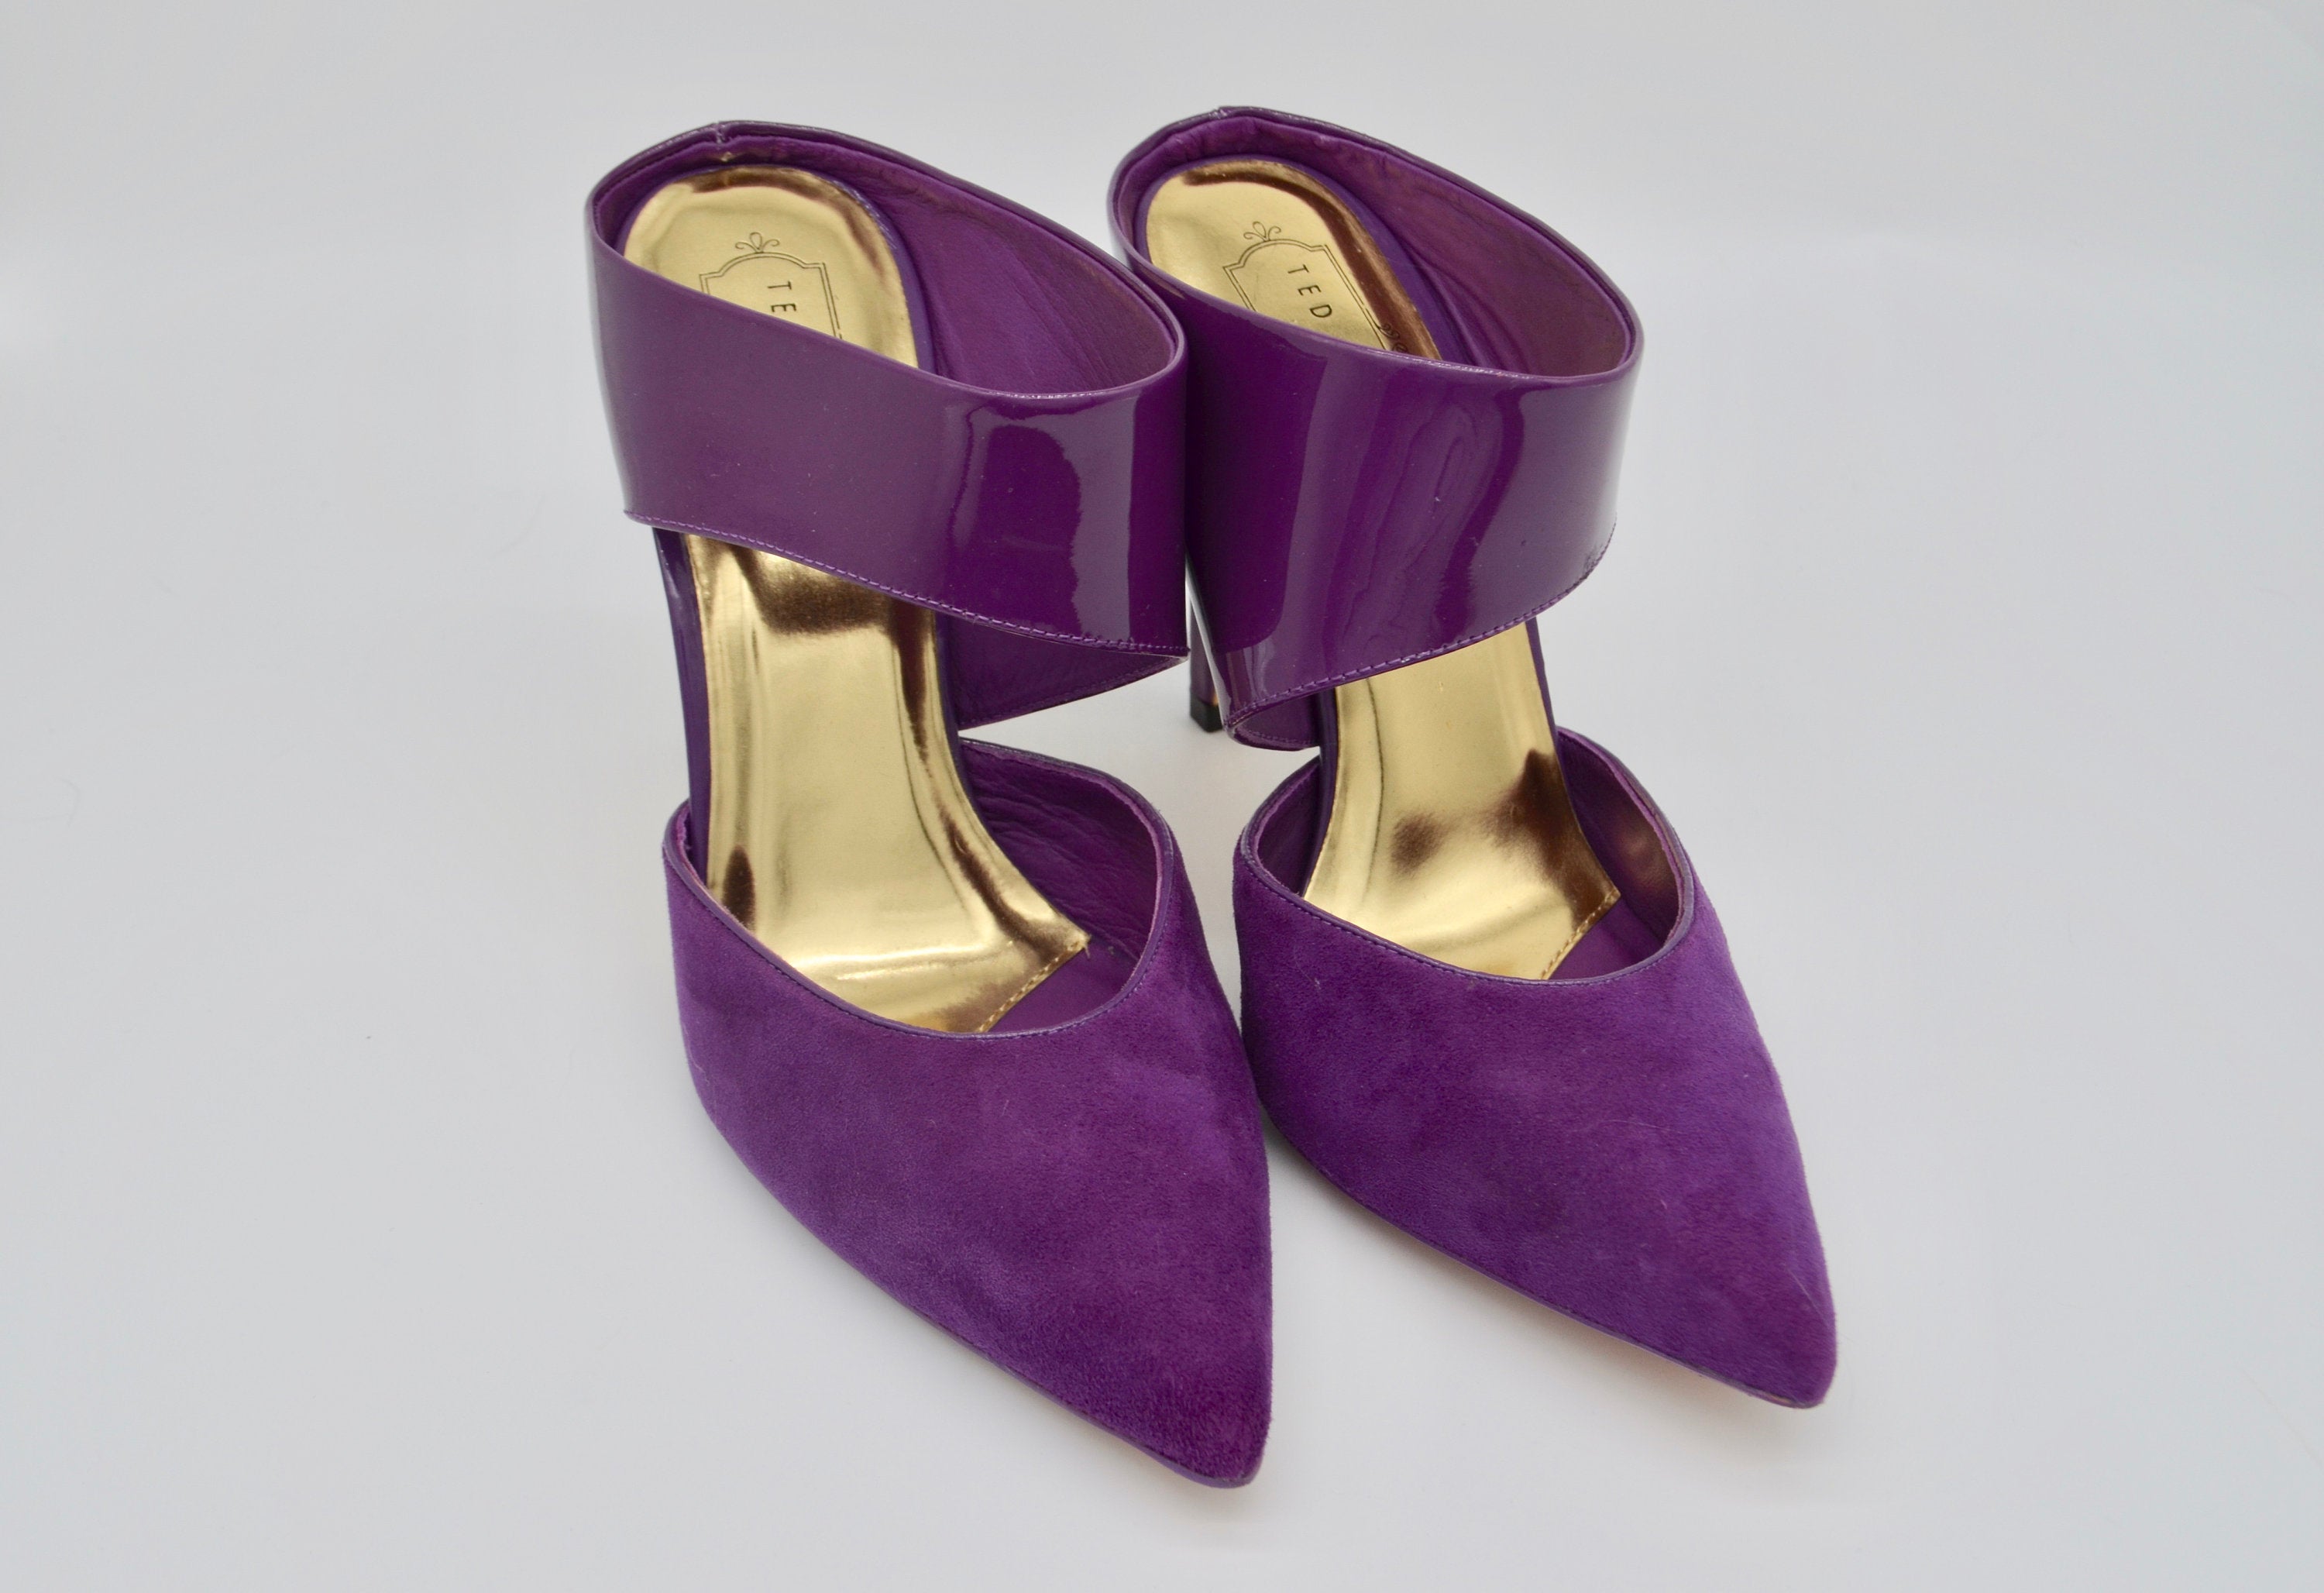 Ted Baker Purple Suede And Leather Dress Pumps High Heel Shoes Mule New Without Box